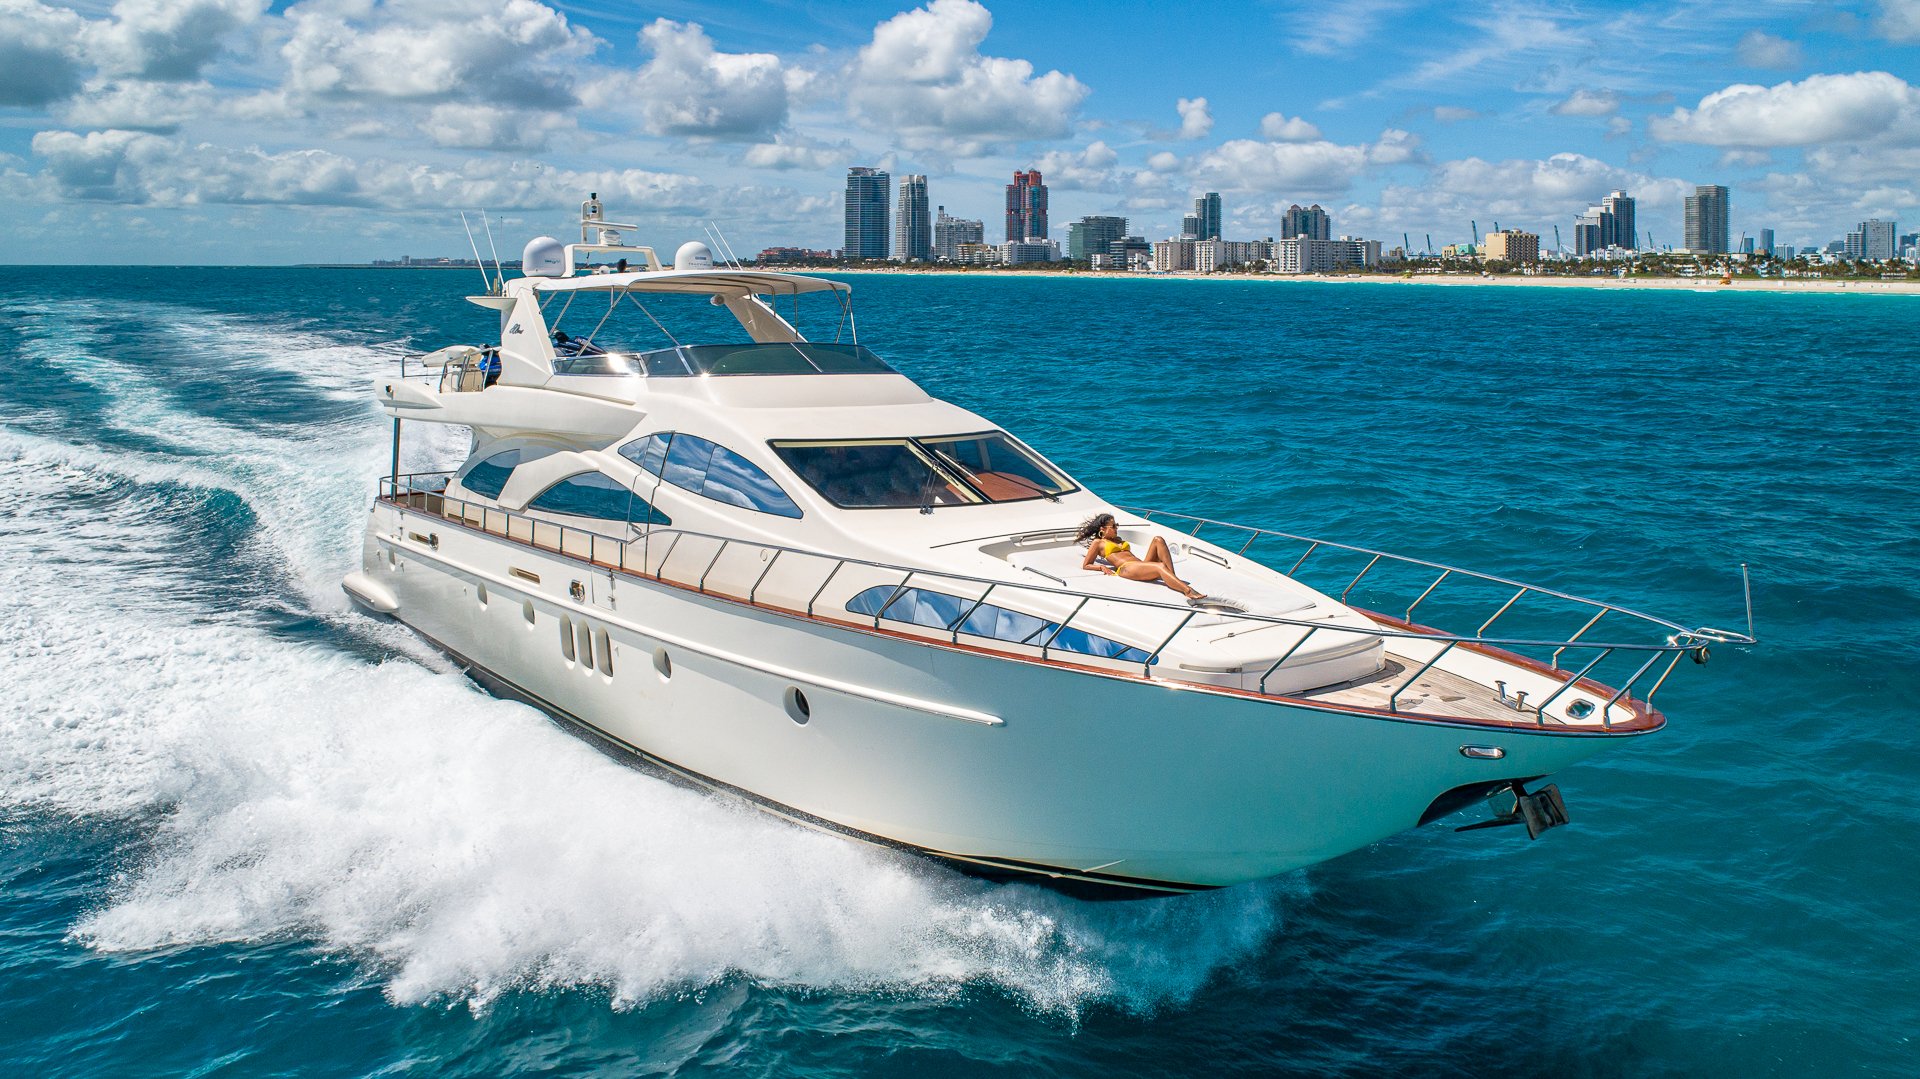 80ft Azimut Private Yacht Rental Miami ﻿